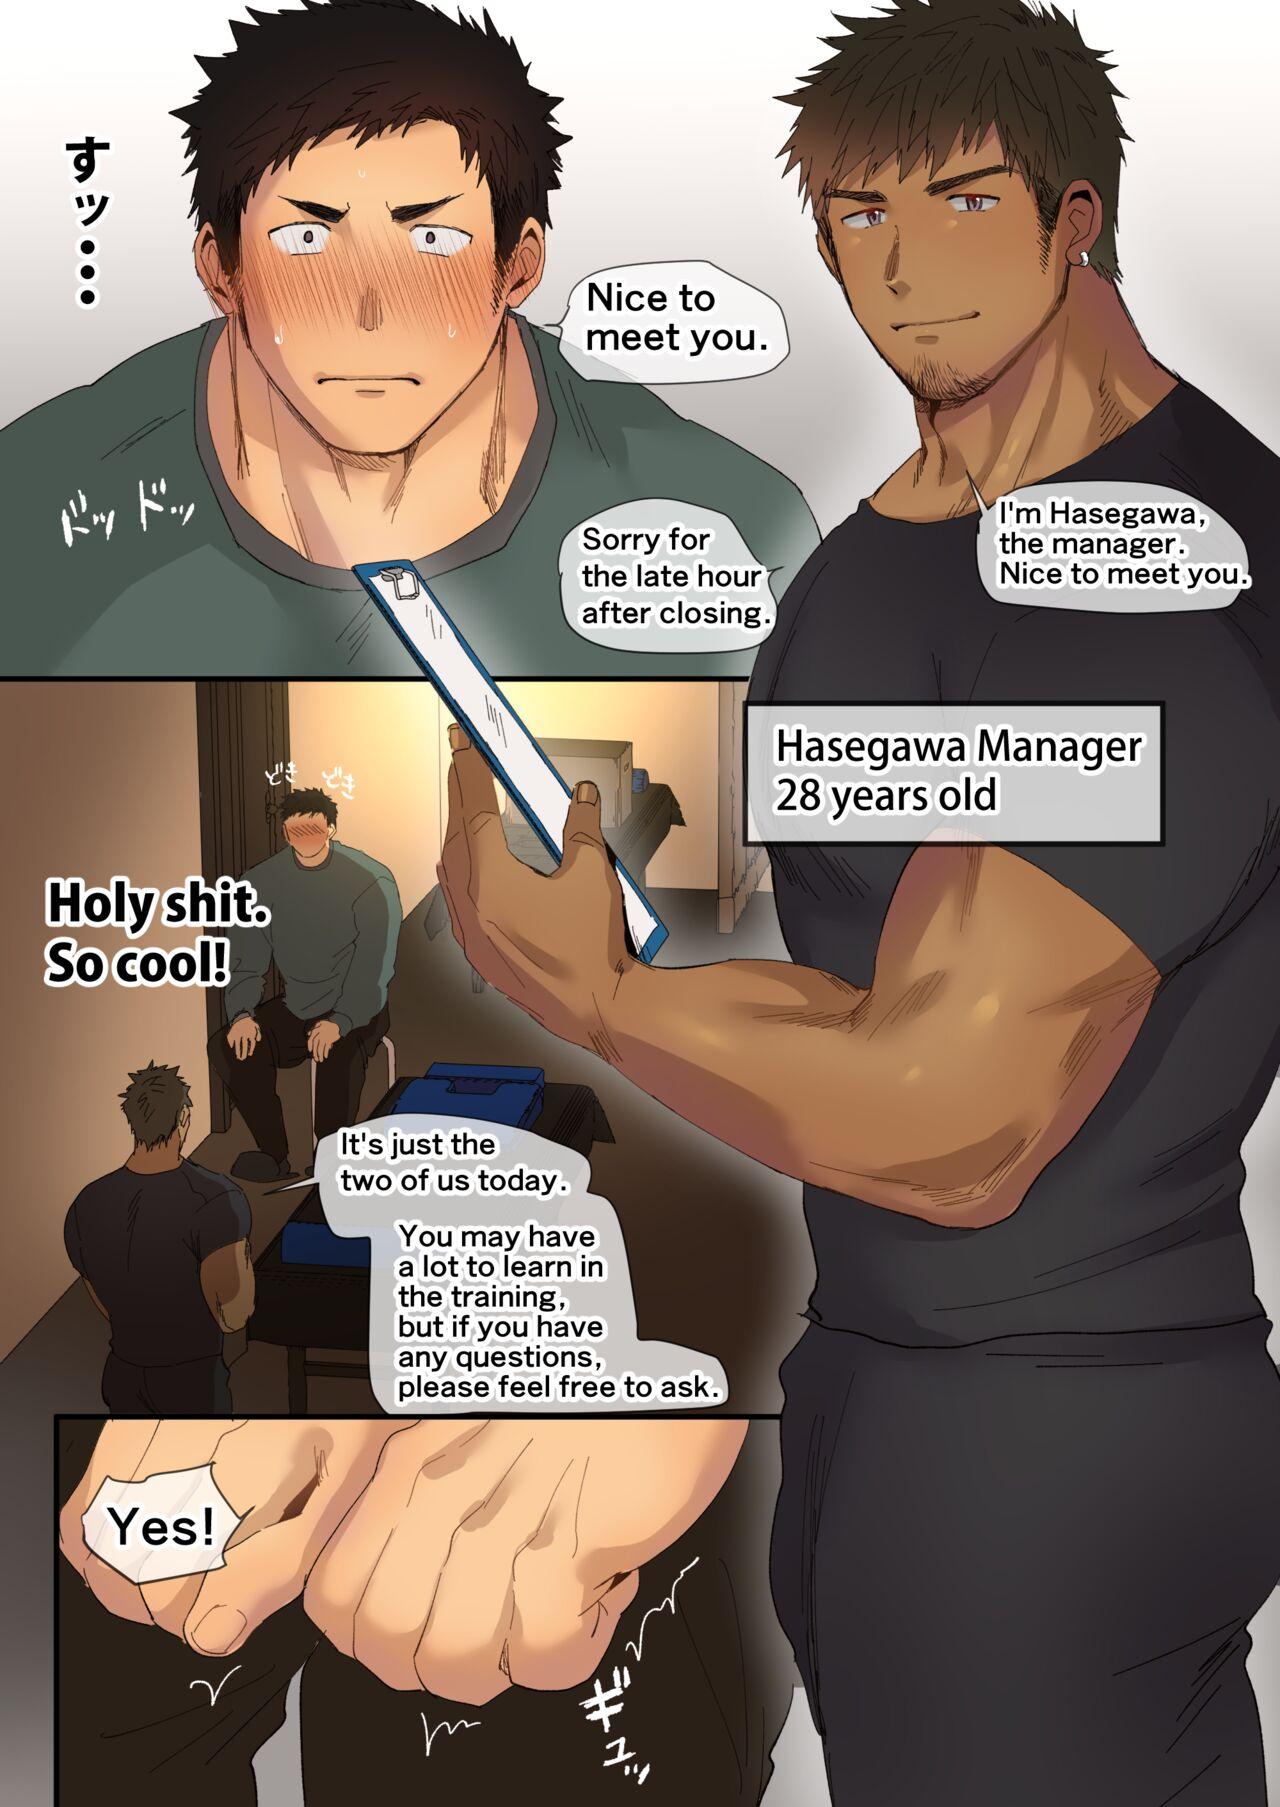 Cheat A manga about an athletic college student who receives sexually explicit massage training from an older manager - Original Brother - Page 2